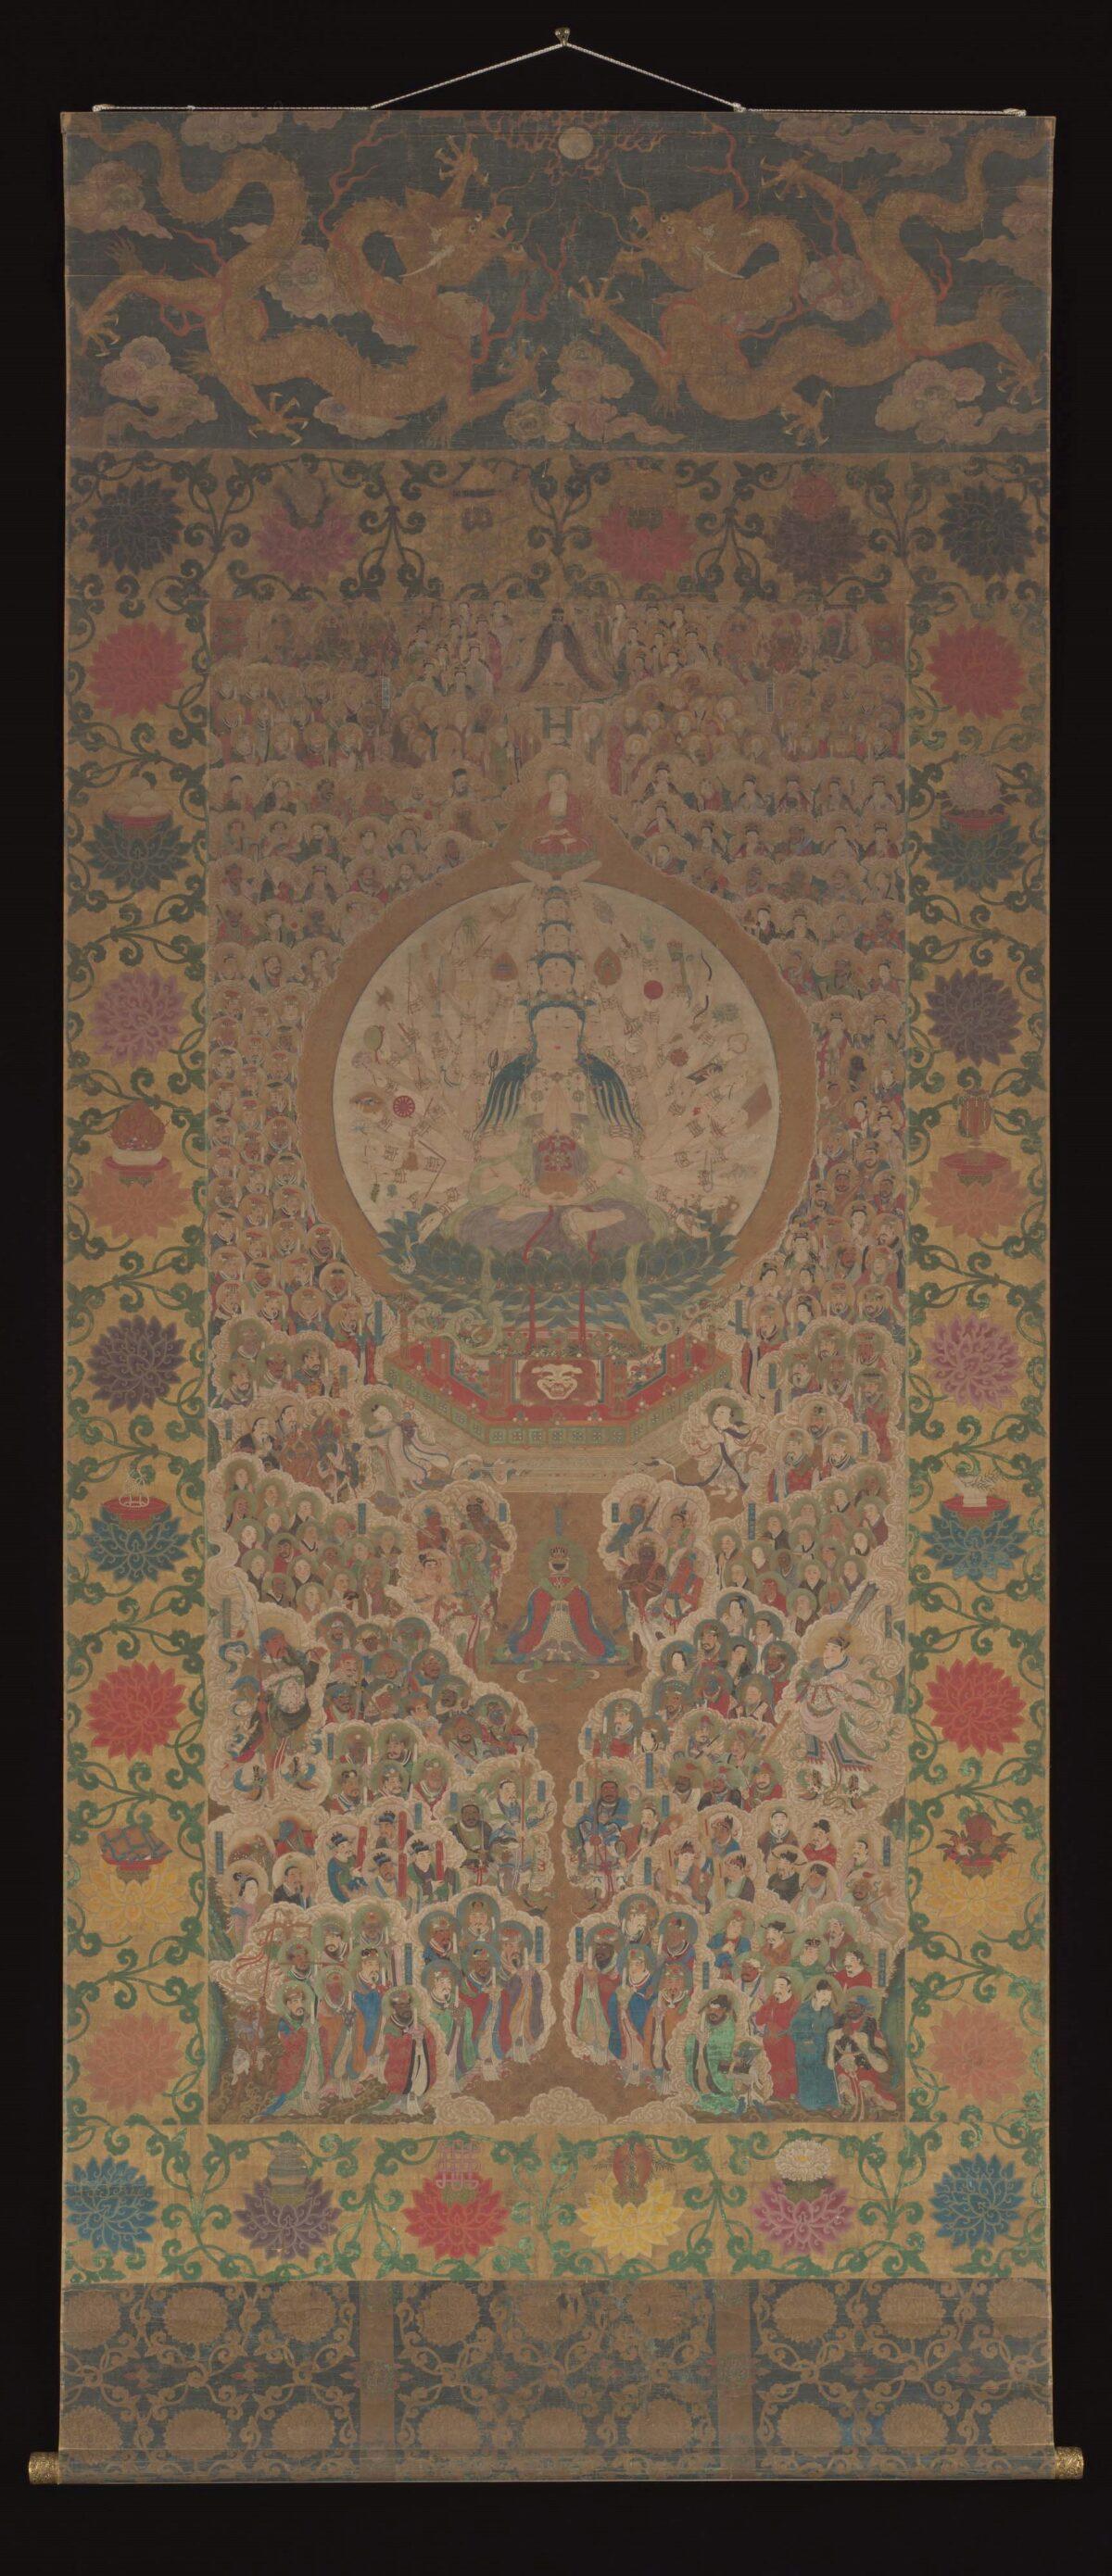 “Thousand-Armed, Thousand-Eyed Guanyin,” 1629, by Zhou Bangzhang. Hanging scroll; ink and color on silk with painted border. Promised gift of the Oscar L. Tang Family; Metropolitan Museum of Art. (Public Domain)